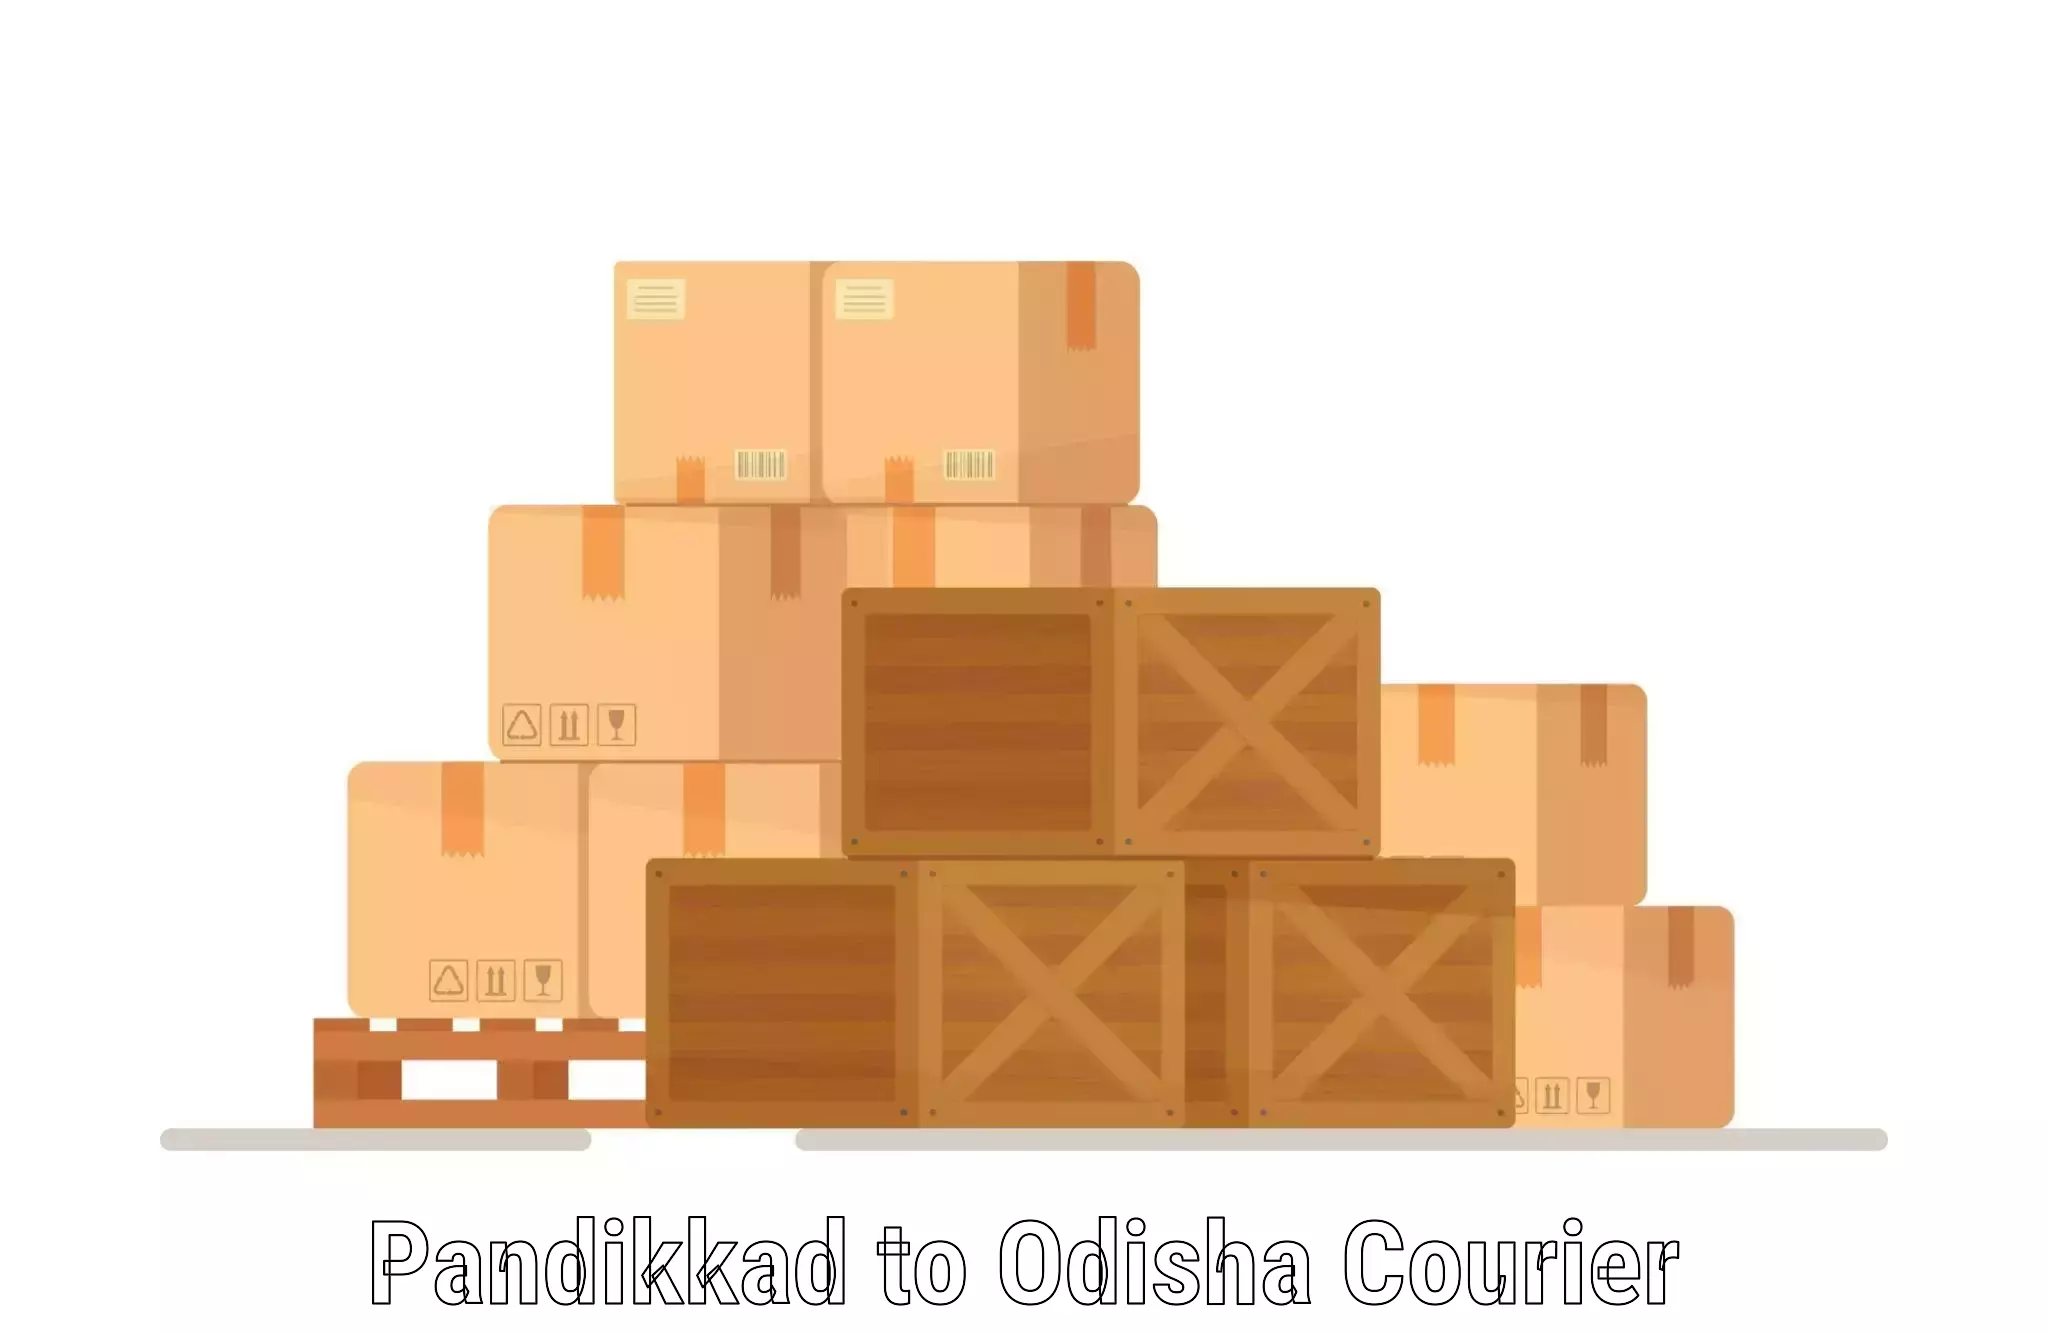 Package delivery network Pandikkad to Paradip Port